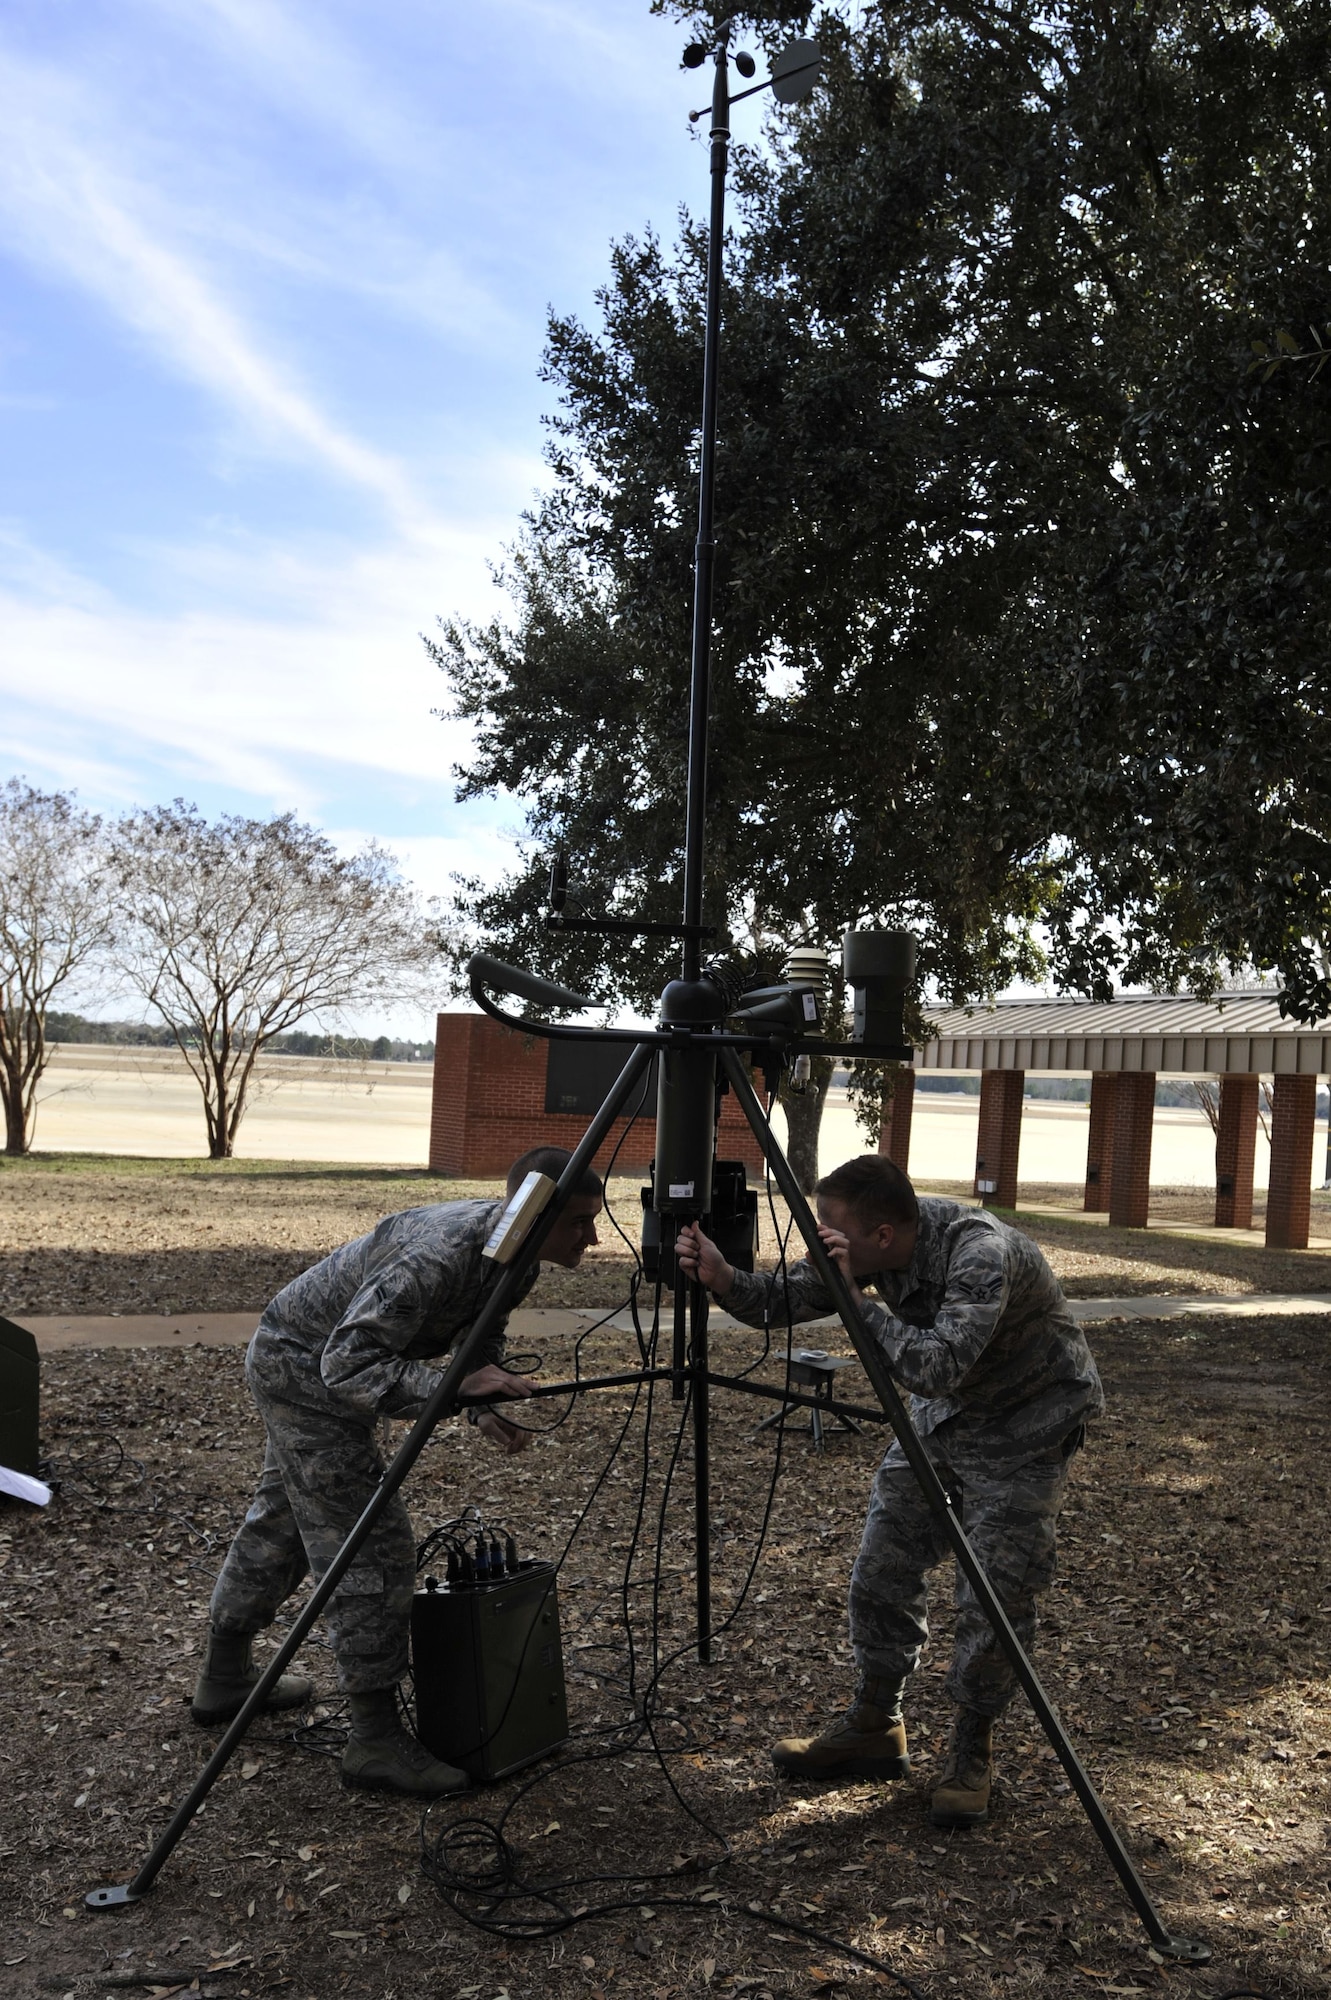 U.S. Air Force Airman 1st Class Ryan Burns, 20th Operations Support Squadron (OSS) weather flight weather journeyman, left, and Airman 1st Class Austin Carter, 20th OSS weather flight weather apprentice, set up a TMQ-53 tactical meteorological observing system at Shaw Air Force Base, S.C., Jan. 26, 2018.